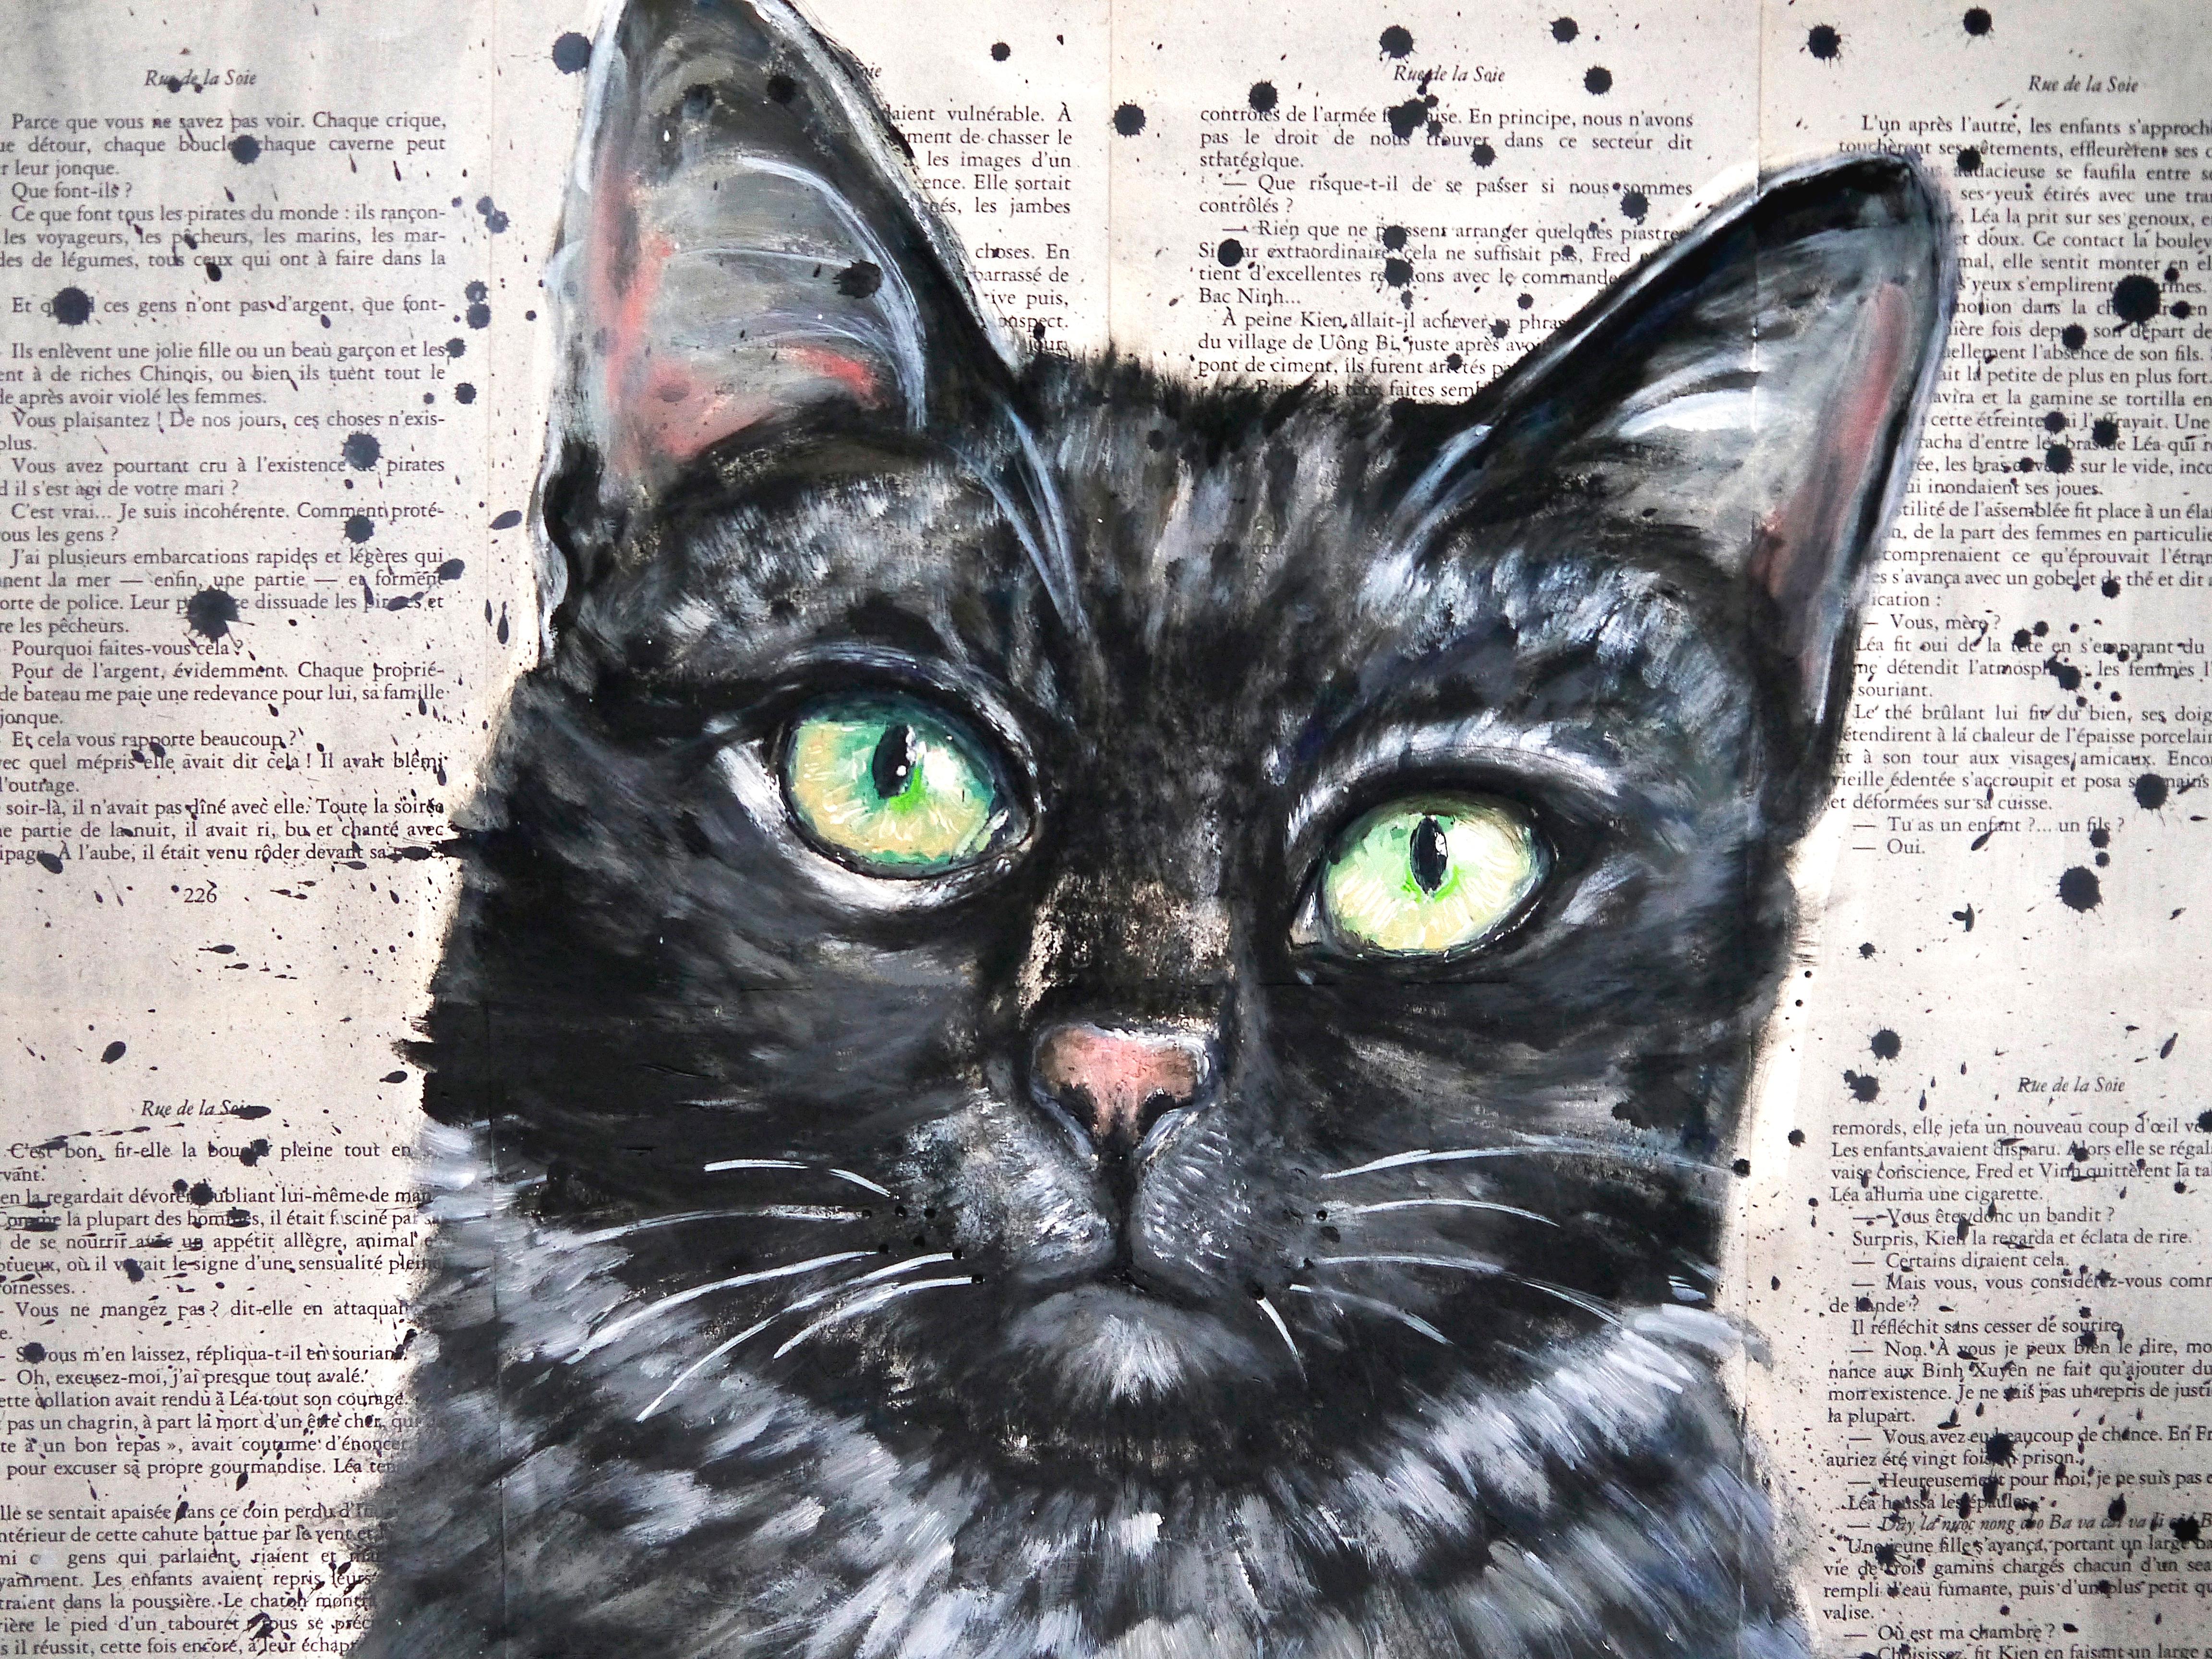 Le chat soulage la nuit de son insatiable manteau gris

Closeup portrait of a grey cat. 
Technique: oil, acrylic, and ink on old book pages on wooden frame 55x55cm ■■ 21,6x21,6 inch

Sustainability: Wooden frame is made by the artist by recycling 